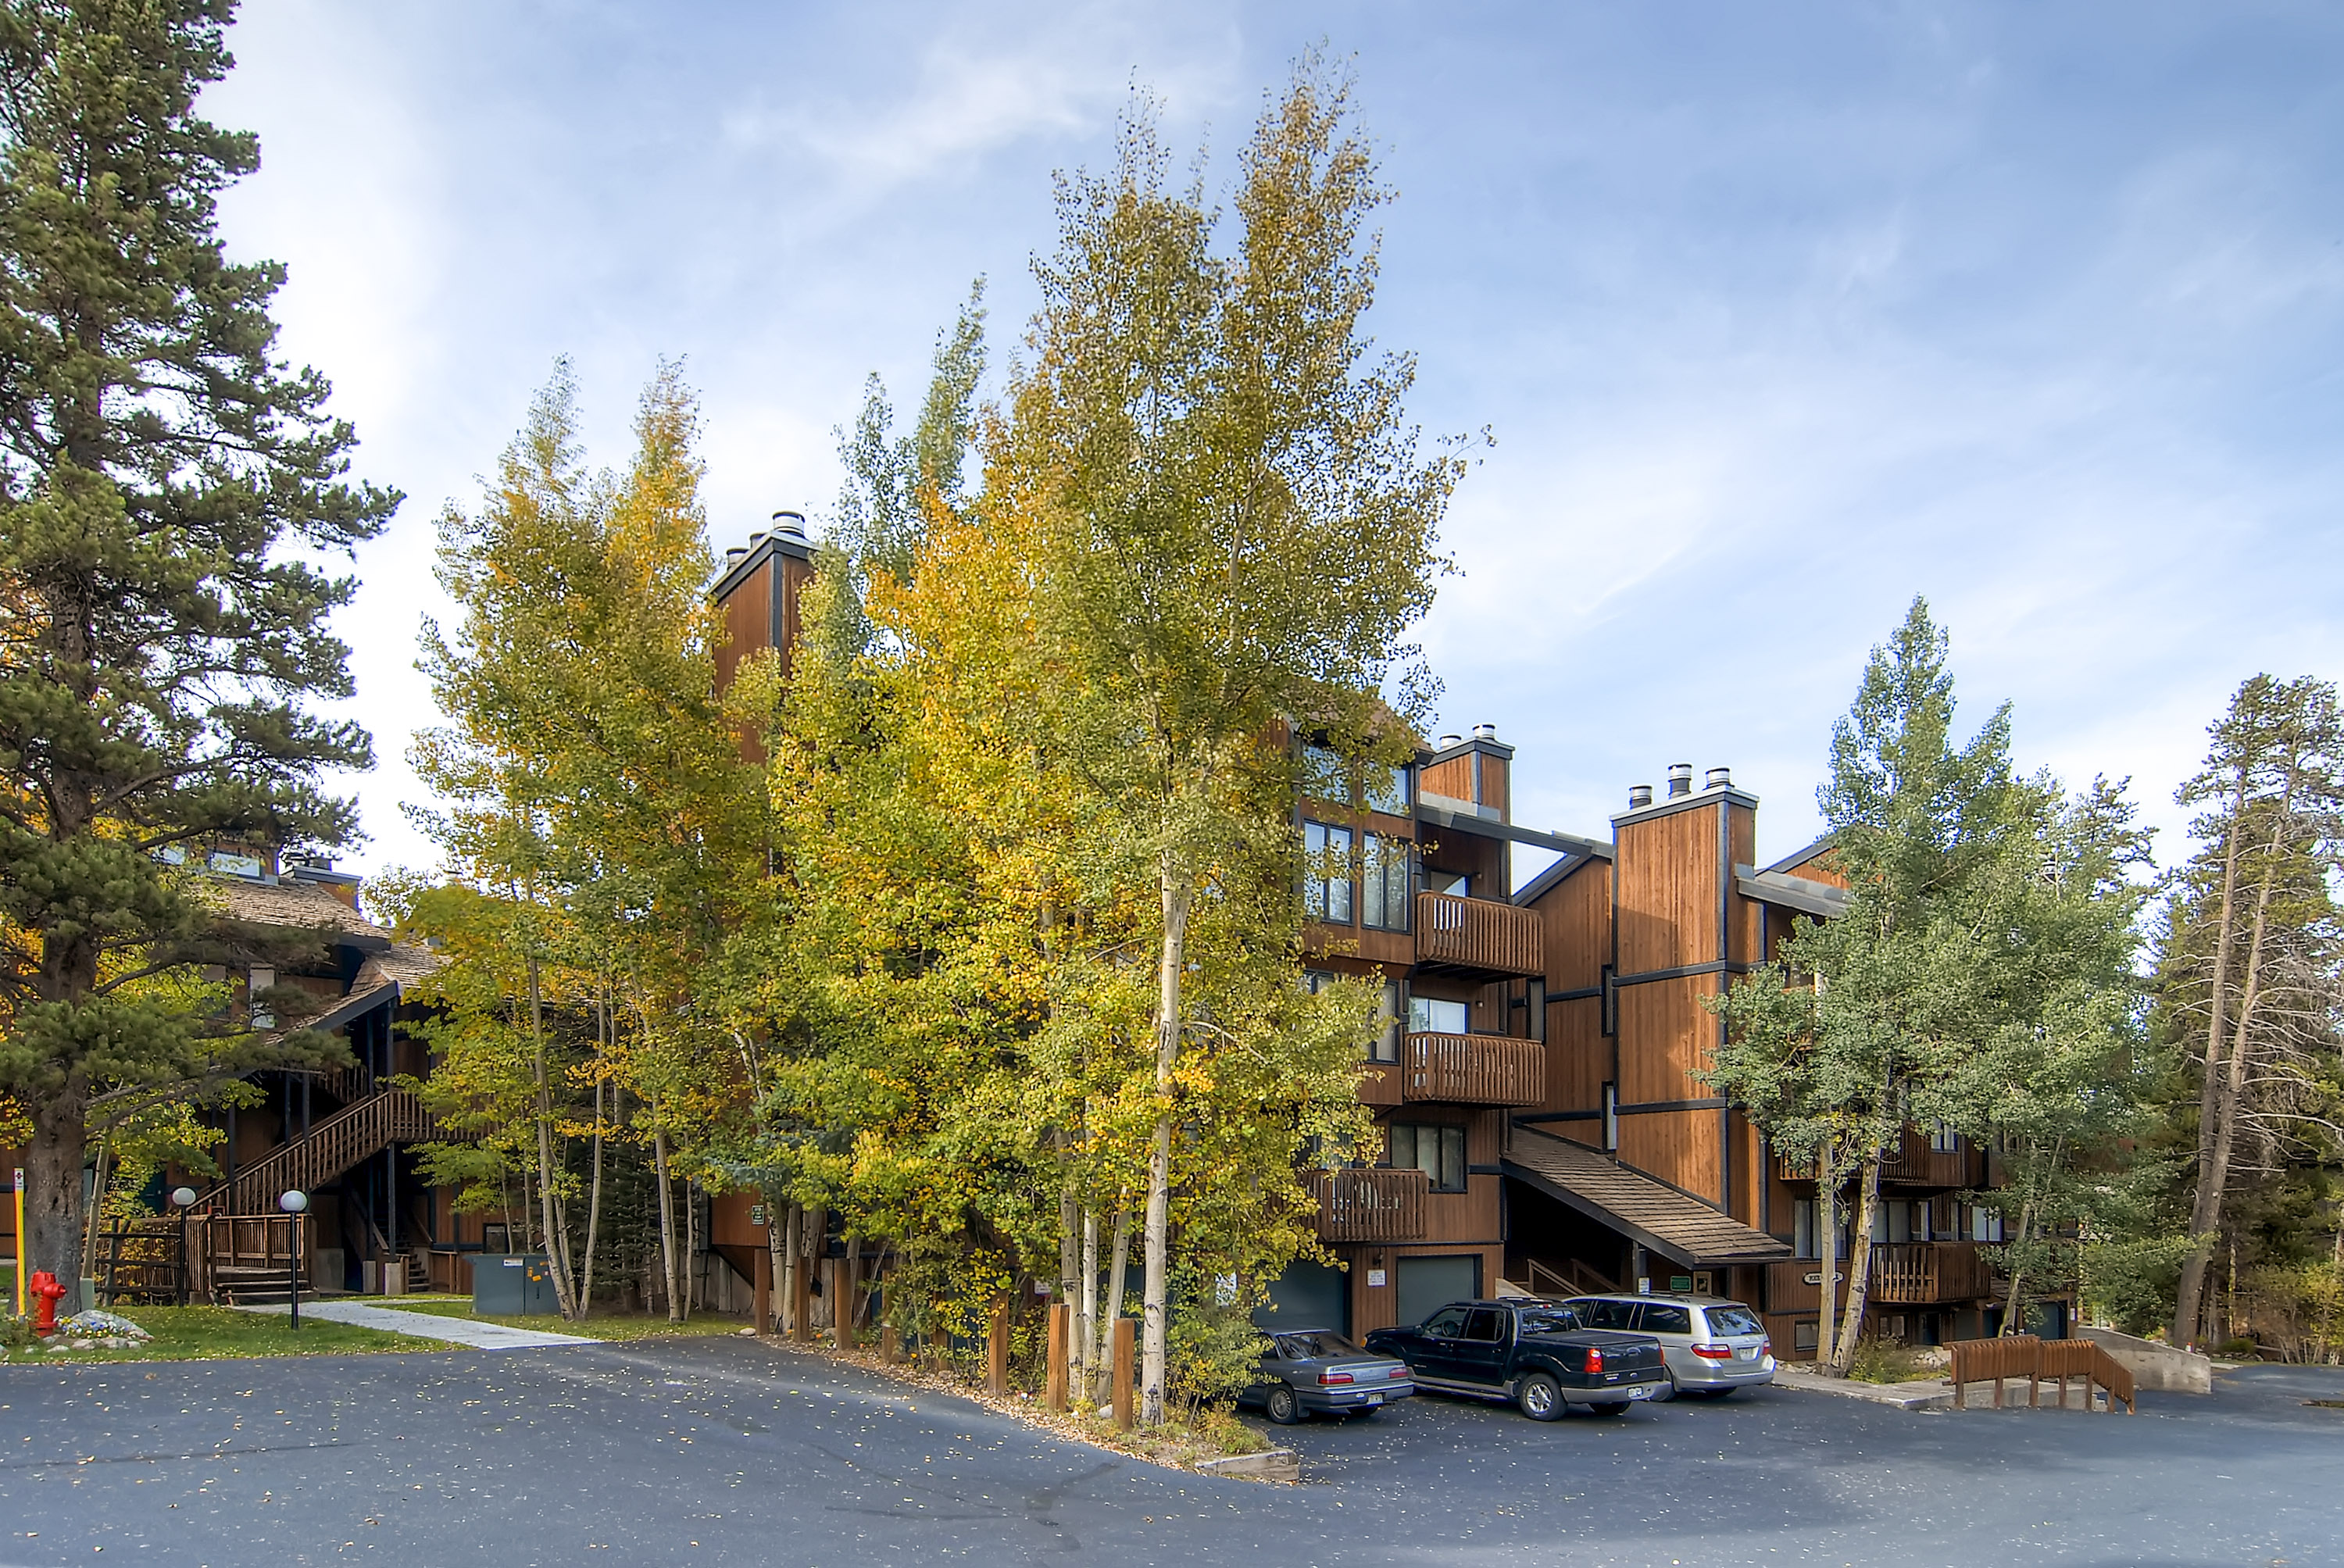 Enjoy the aspens right outside of your window from the top floor unit.